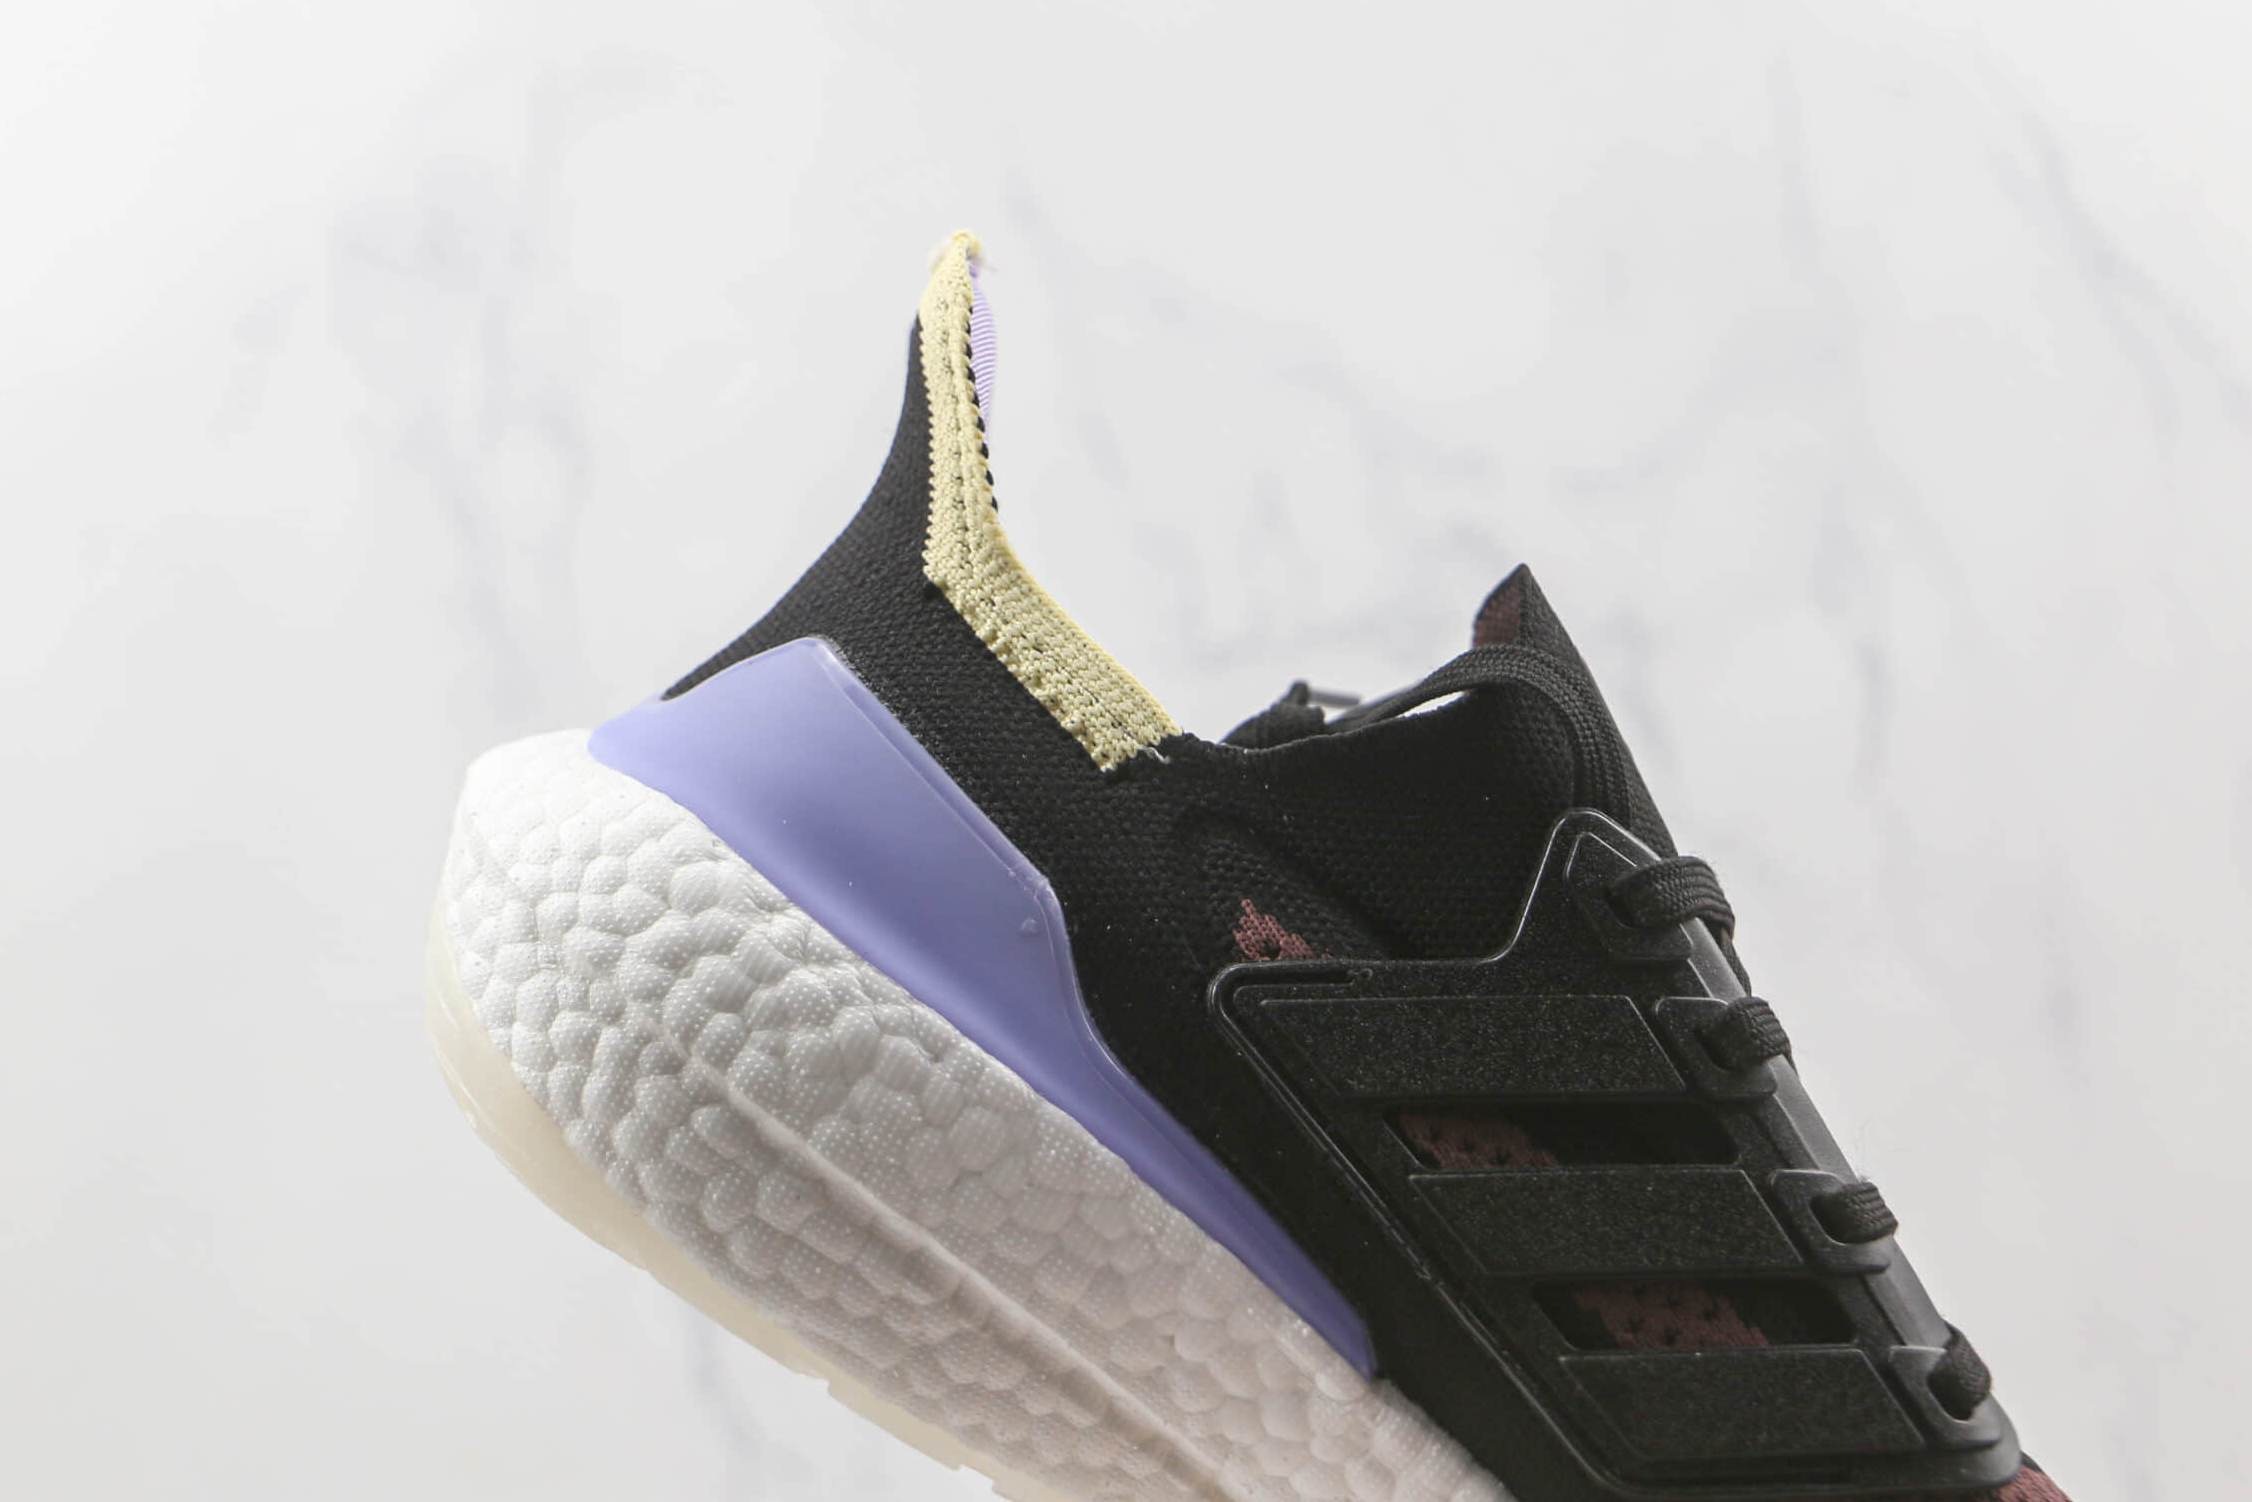 Adidas UltraBoost 21 Black Violet Tone S23841 - Latest Release for Ultimate Performance